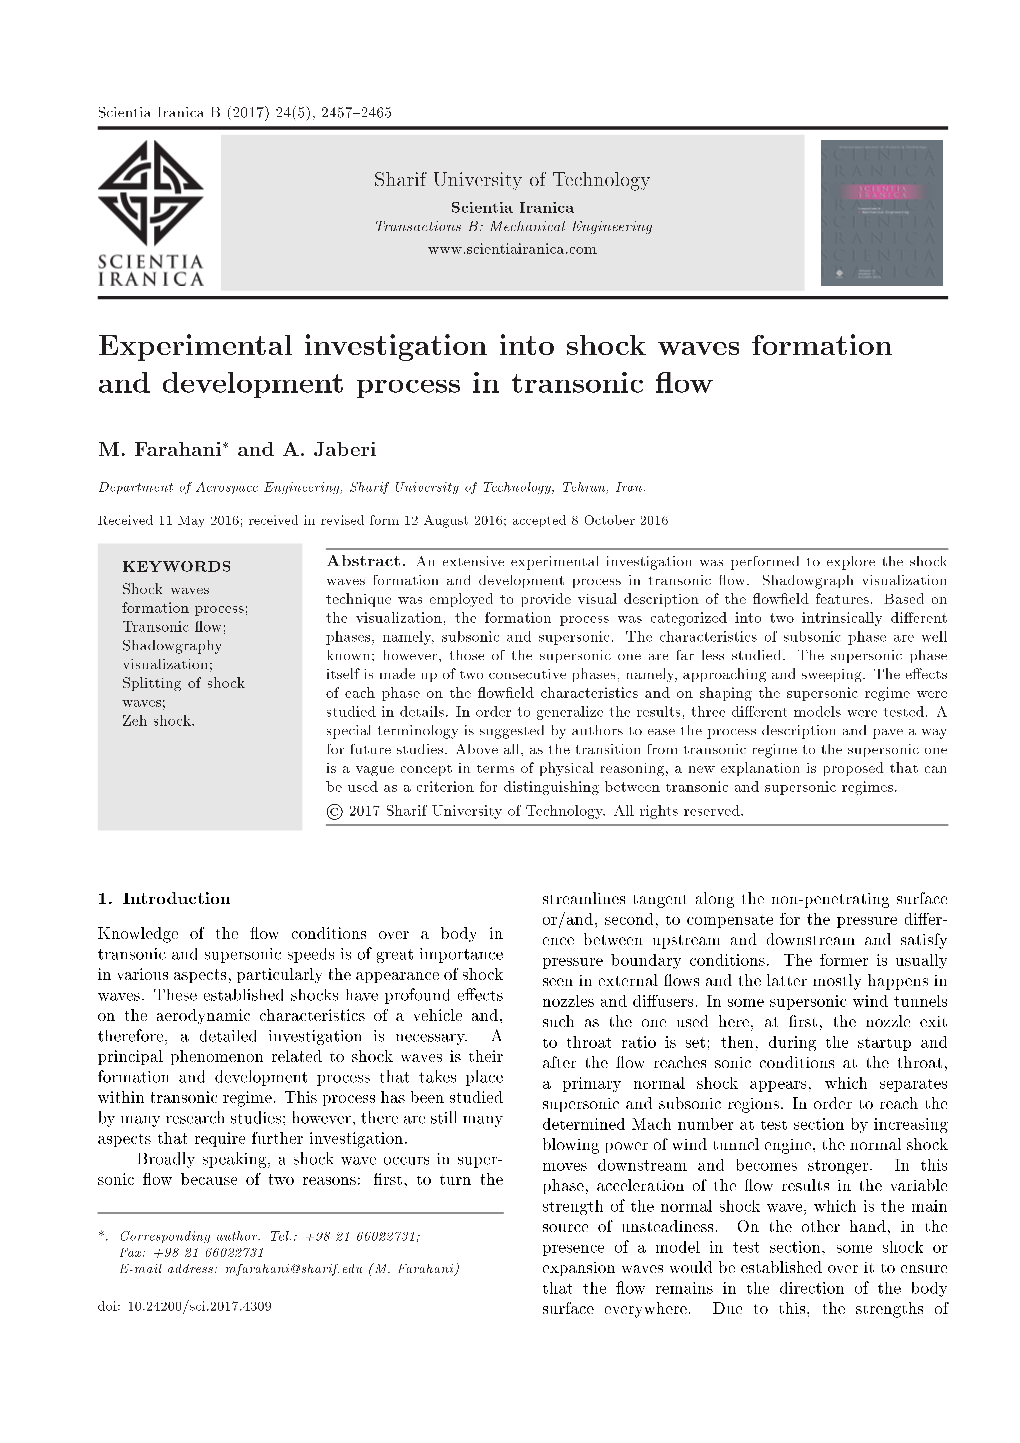 Experimental Investigation Into Shock Waves Formation and Development Process in Transonic Ow